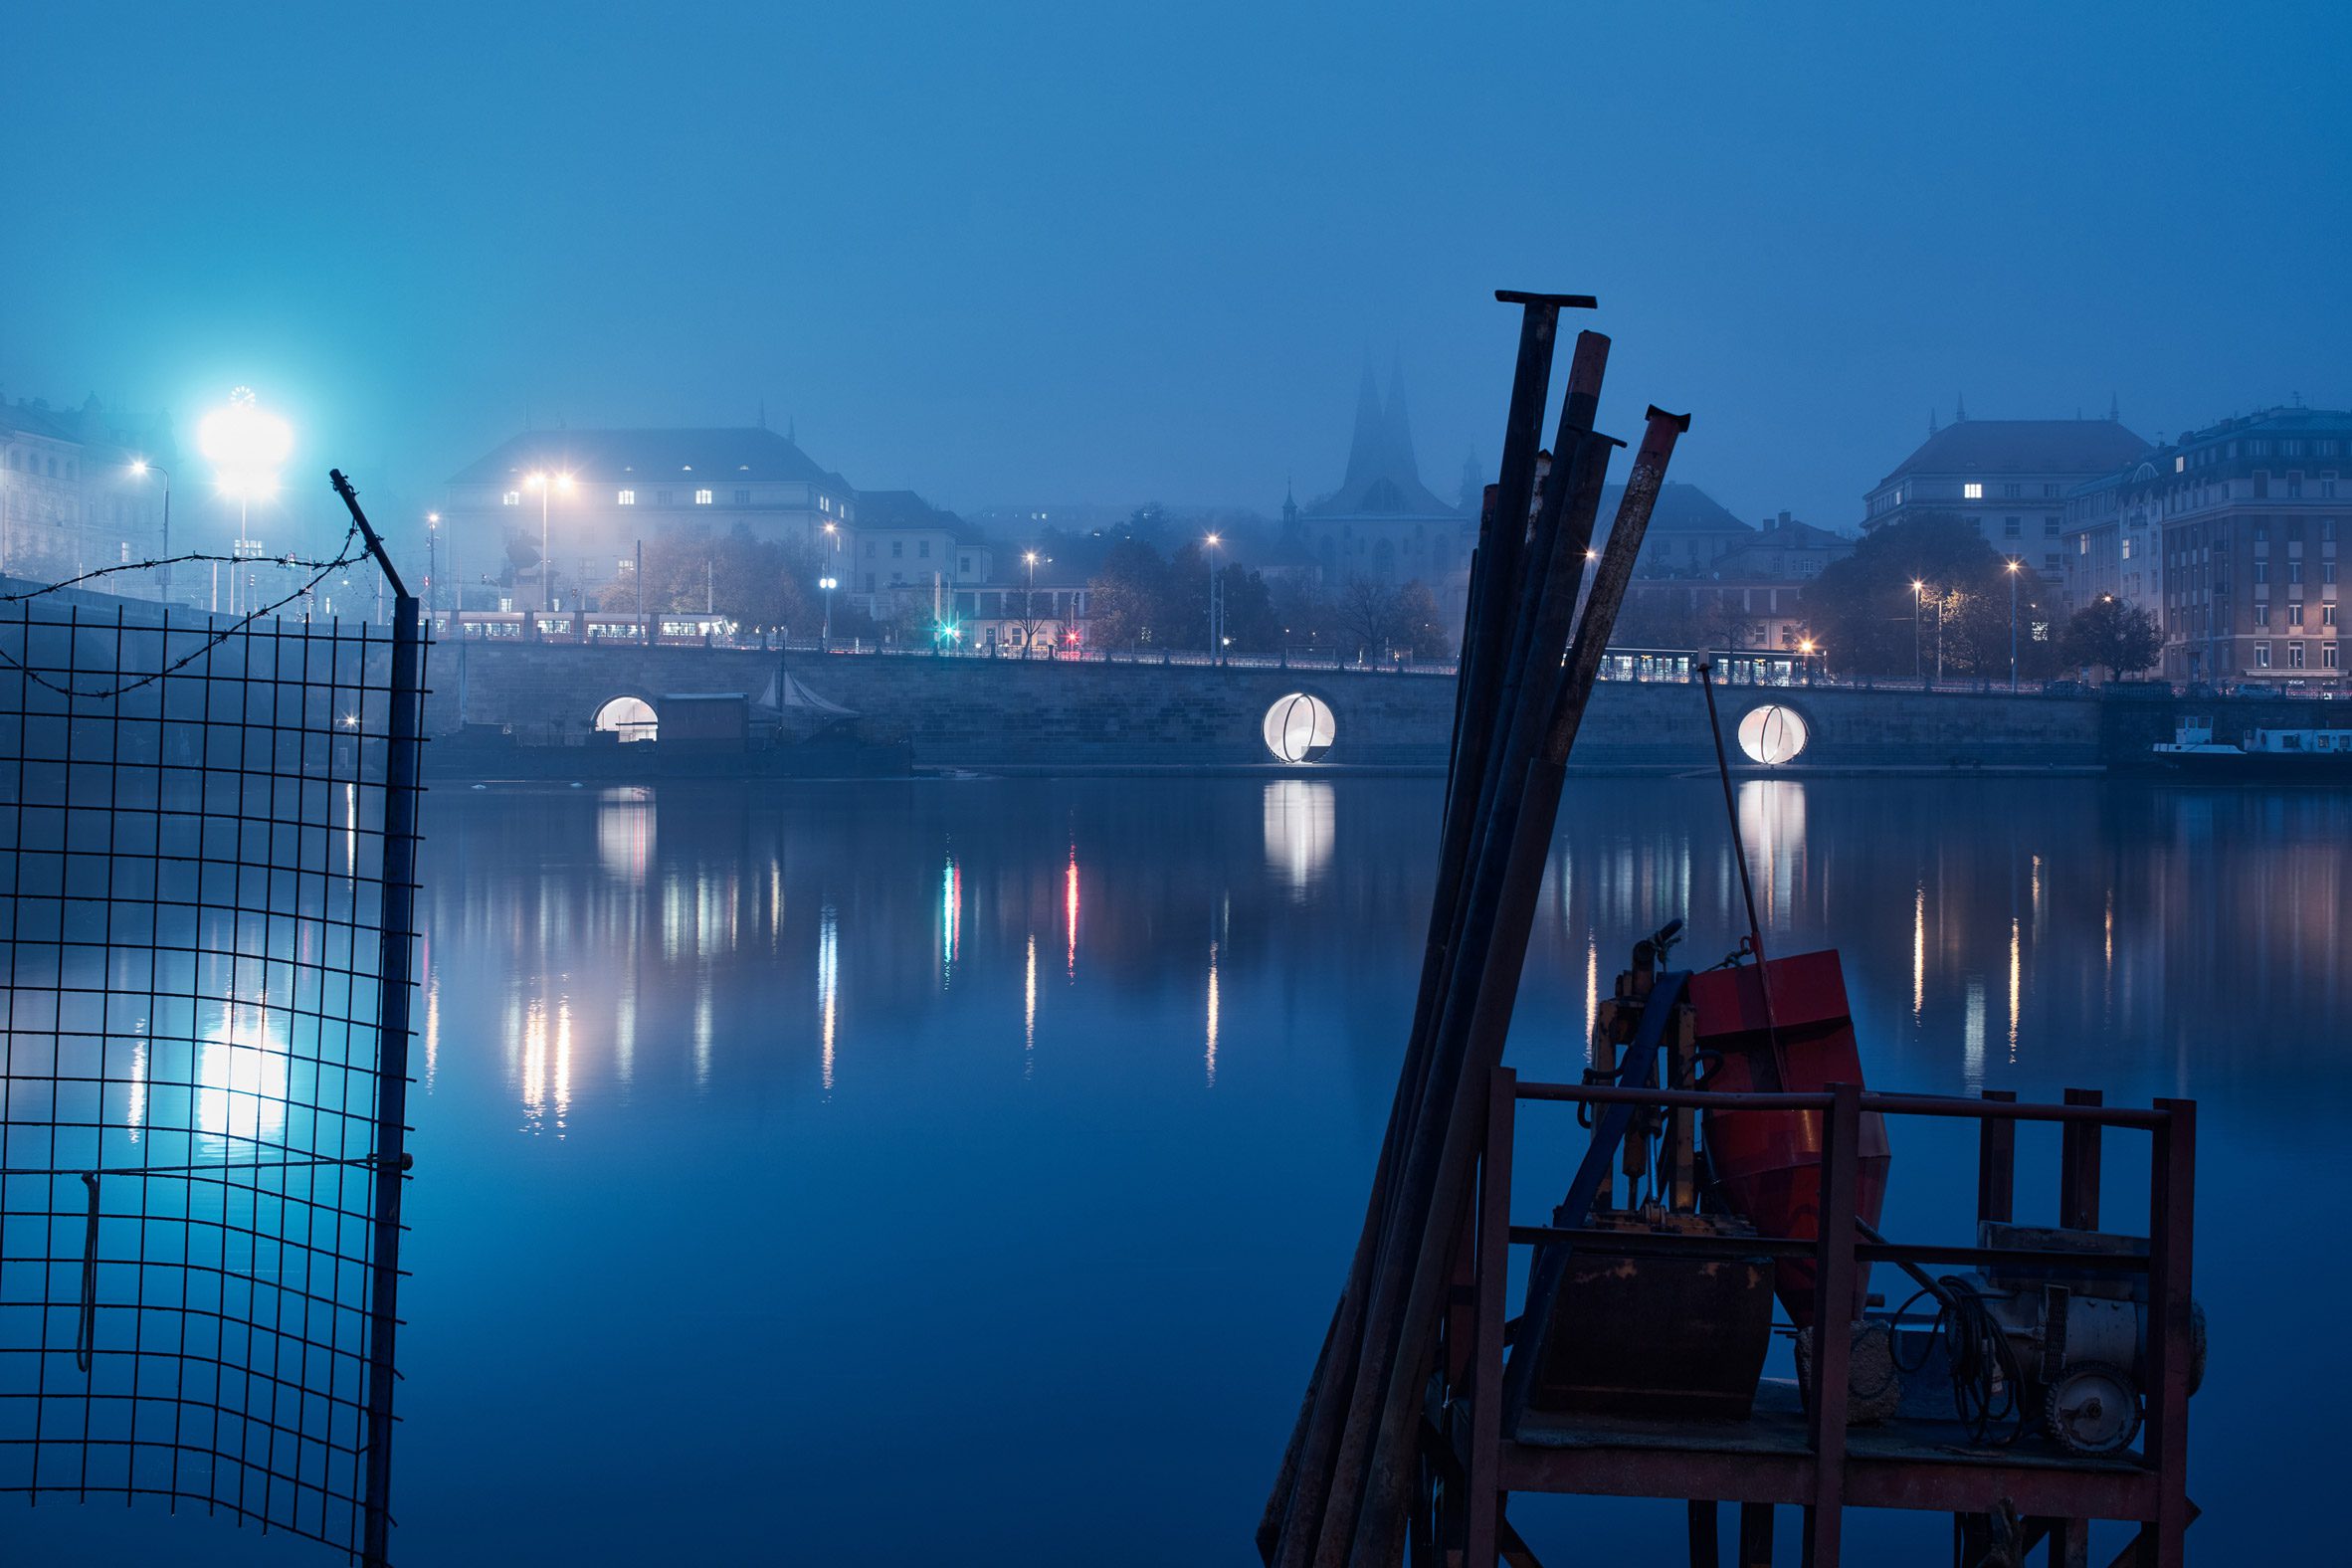 The Prague waterfront is illuminated by the public space